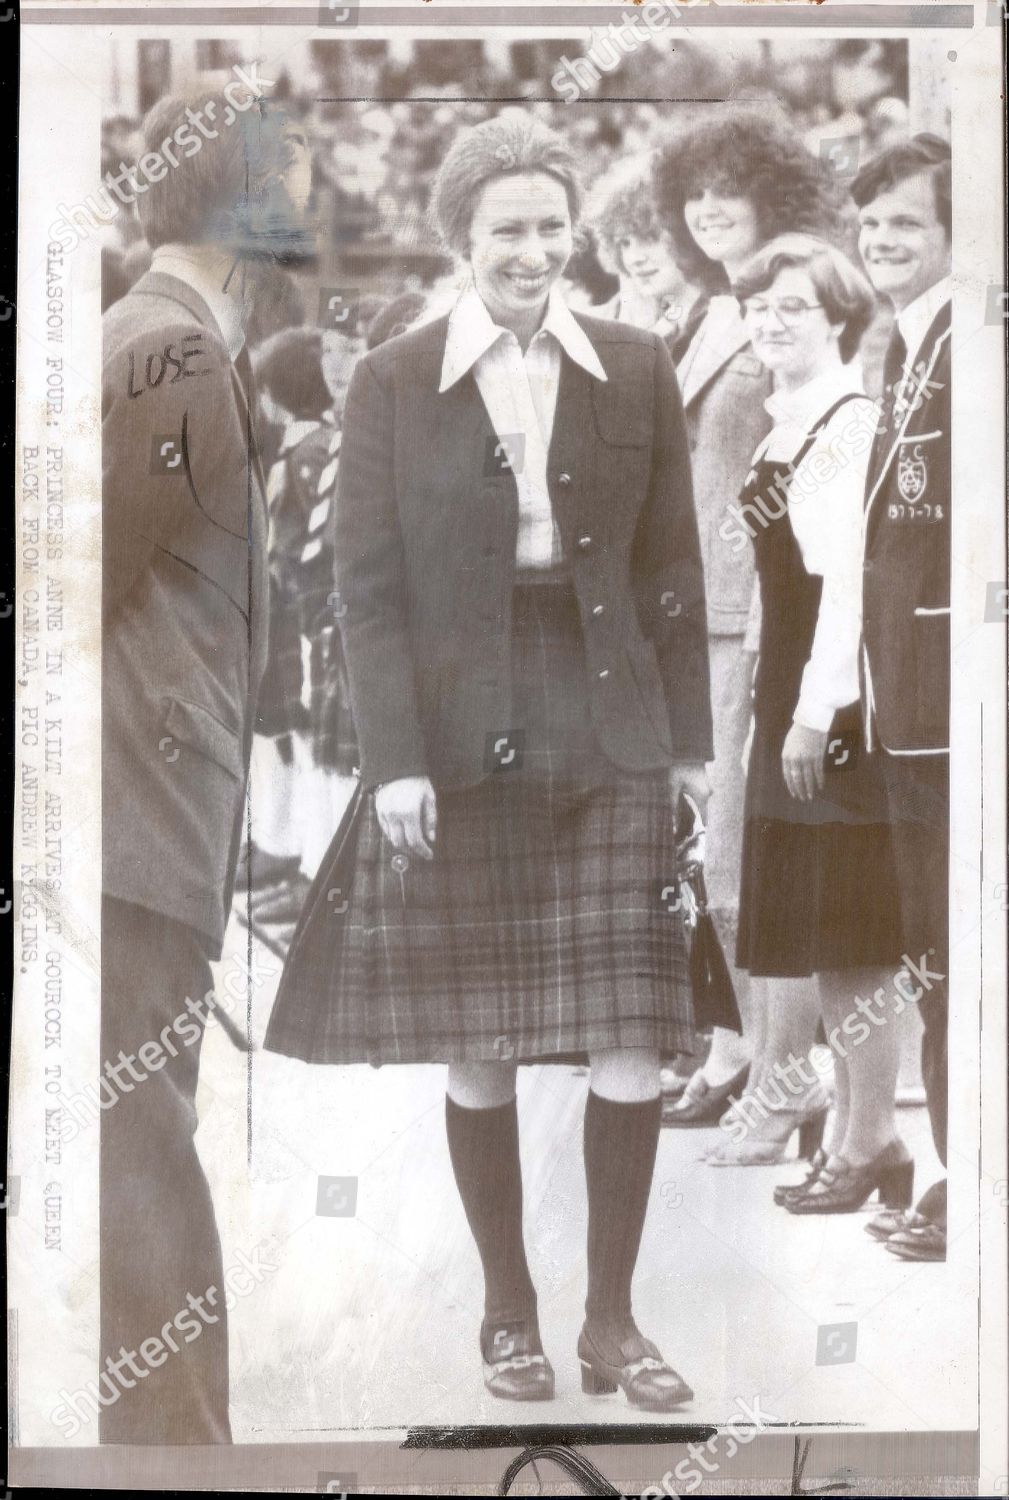 princess-anne-now-princess-royal-august-1978-when-in-scotland-theres-nothing-more-approriate-to-wear-than-a-clan-tartan-so-it-comes-as-nosurprise-to-see-princess-anne-between-show-jumping-evvents-sporting-a-kilt-of-hunting-steward-and-fitted-ja-shutterstock-editorial-890882a.jpg